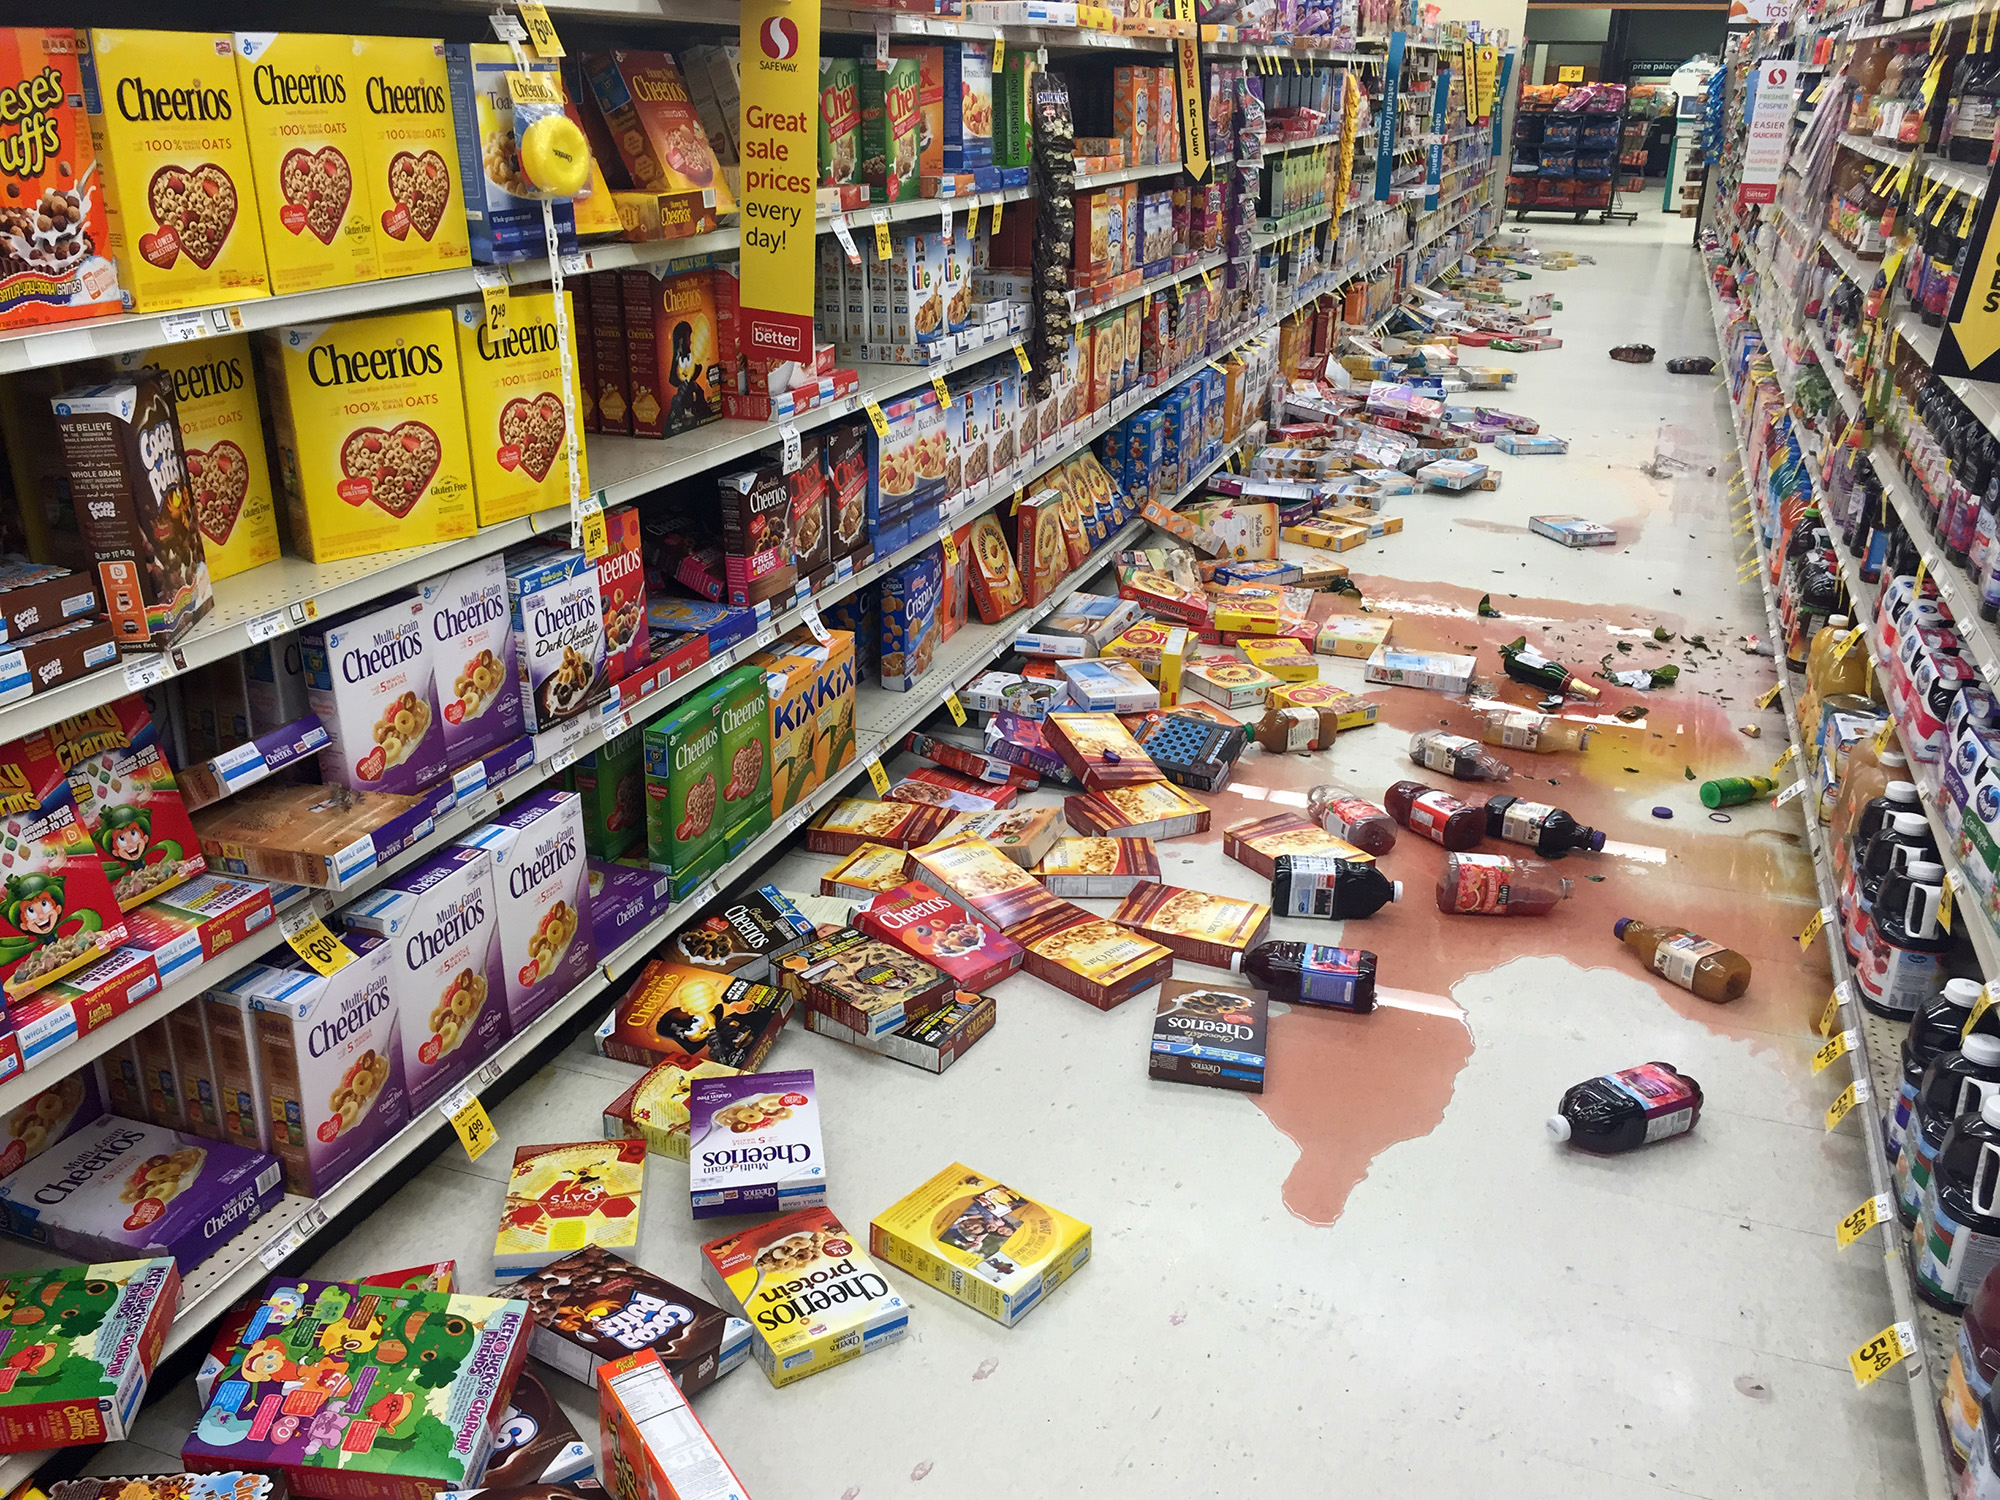 Boxes of cereal and bottles of juice lie on the floor of a Safeway grocery store following an earthquake on the Kenai Peninsula in Alaska on Jan. 24, 2016. (Vincent Nusunginya—AP)